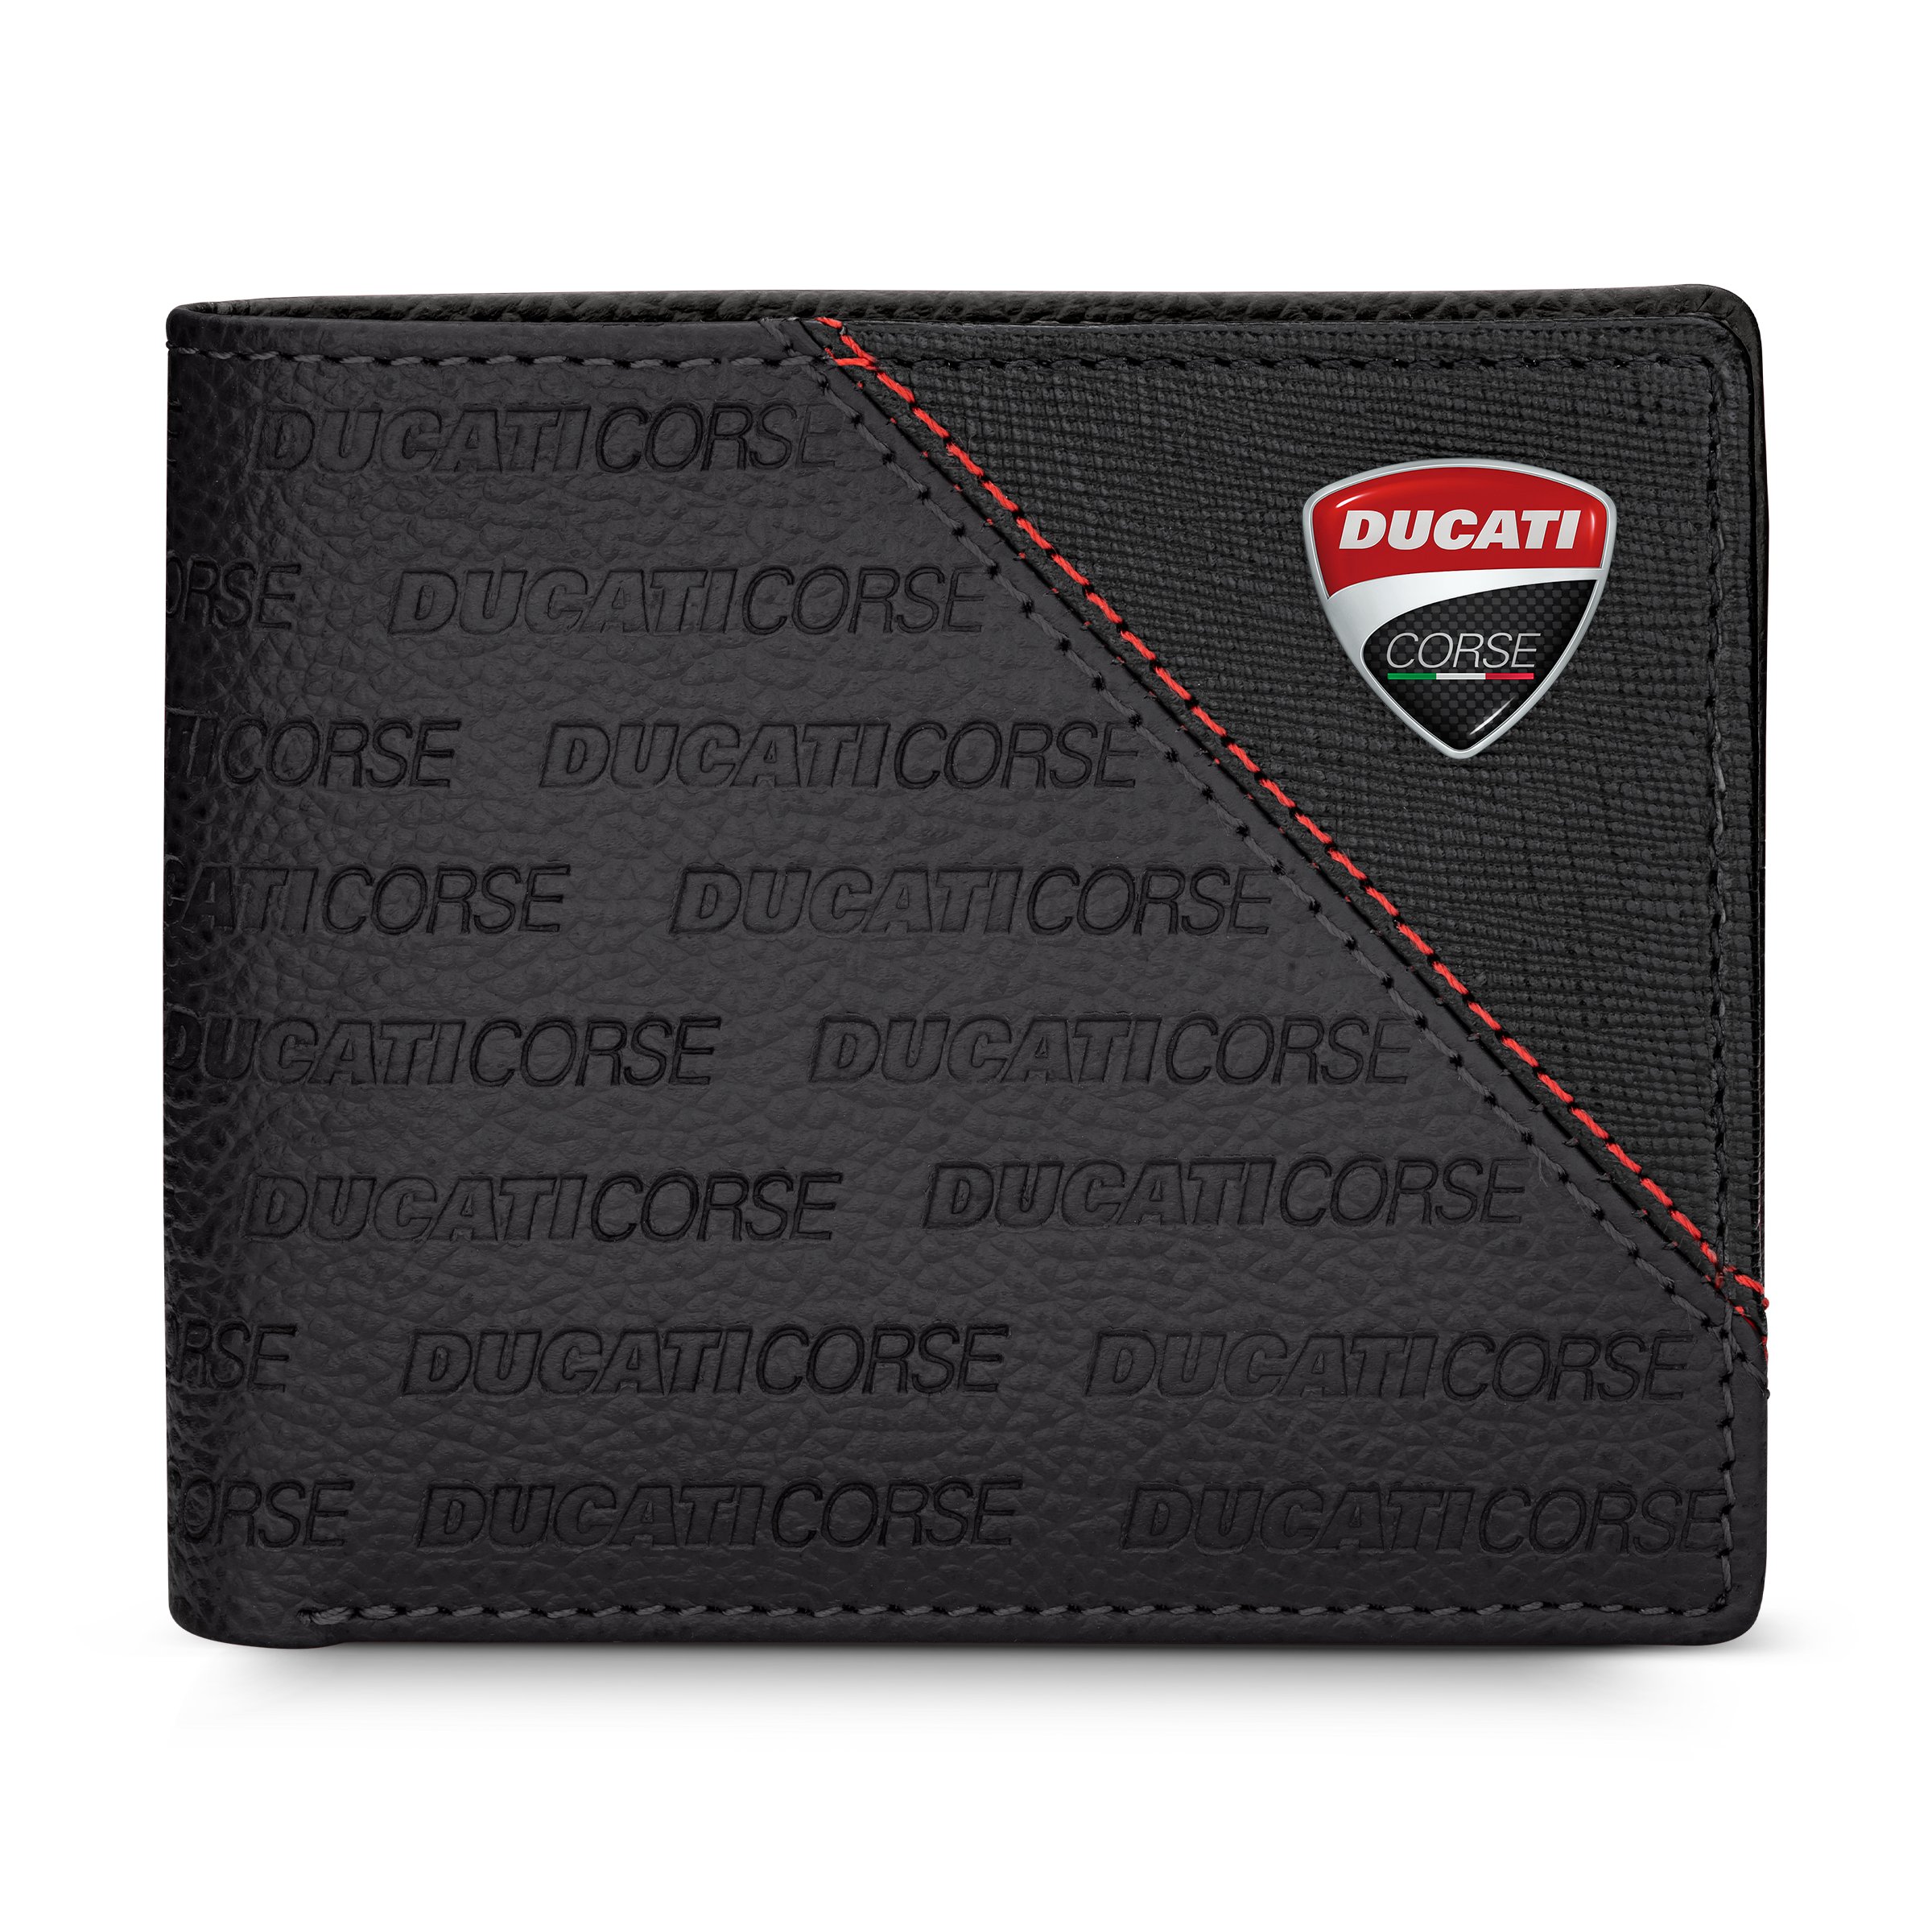 <p><strong>Ducati Corse Black Genuine Leather Wallet For Men Dtlgw2200301</strong></p>